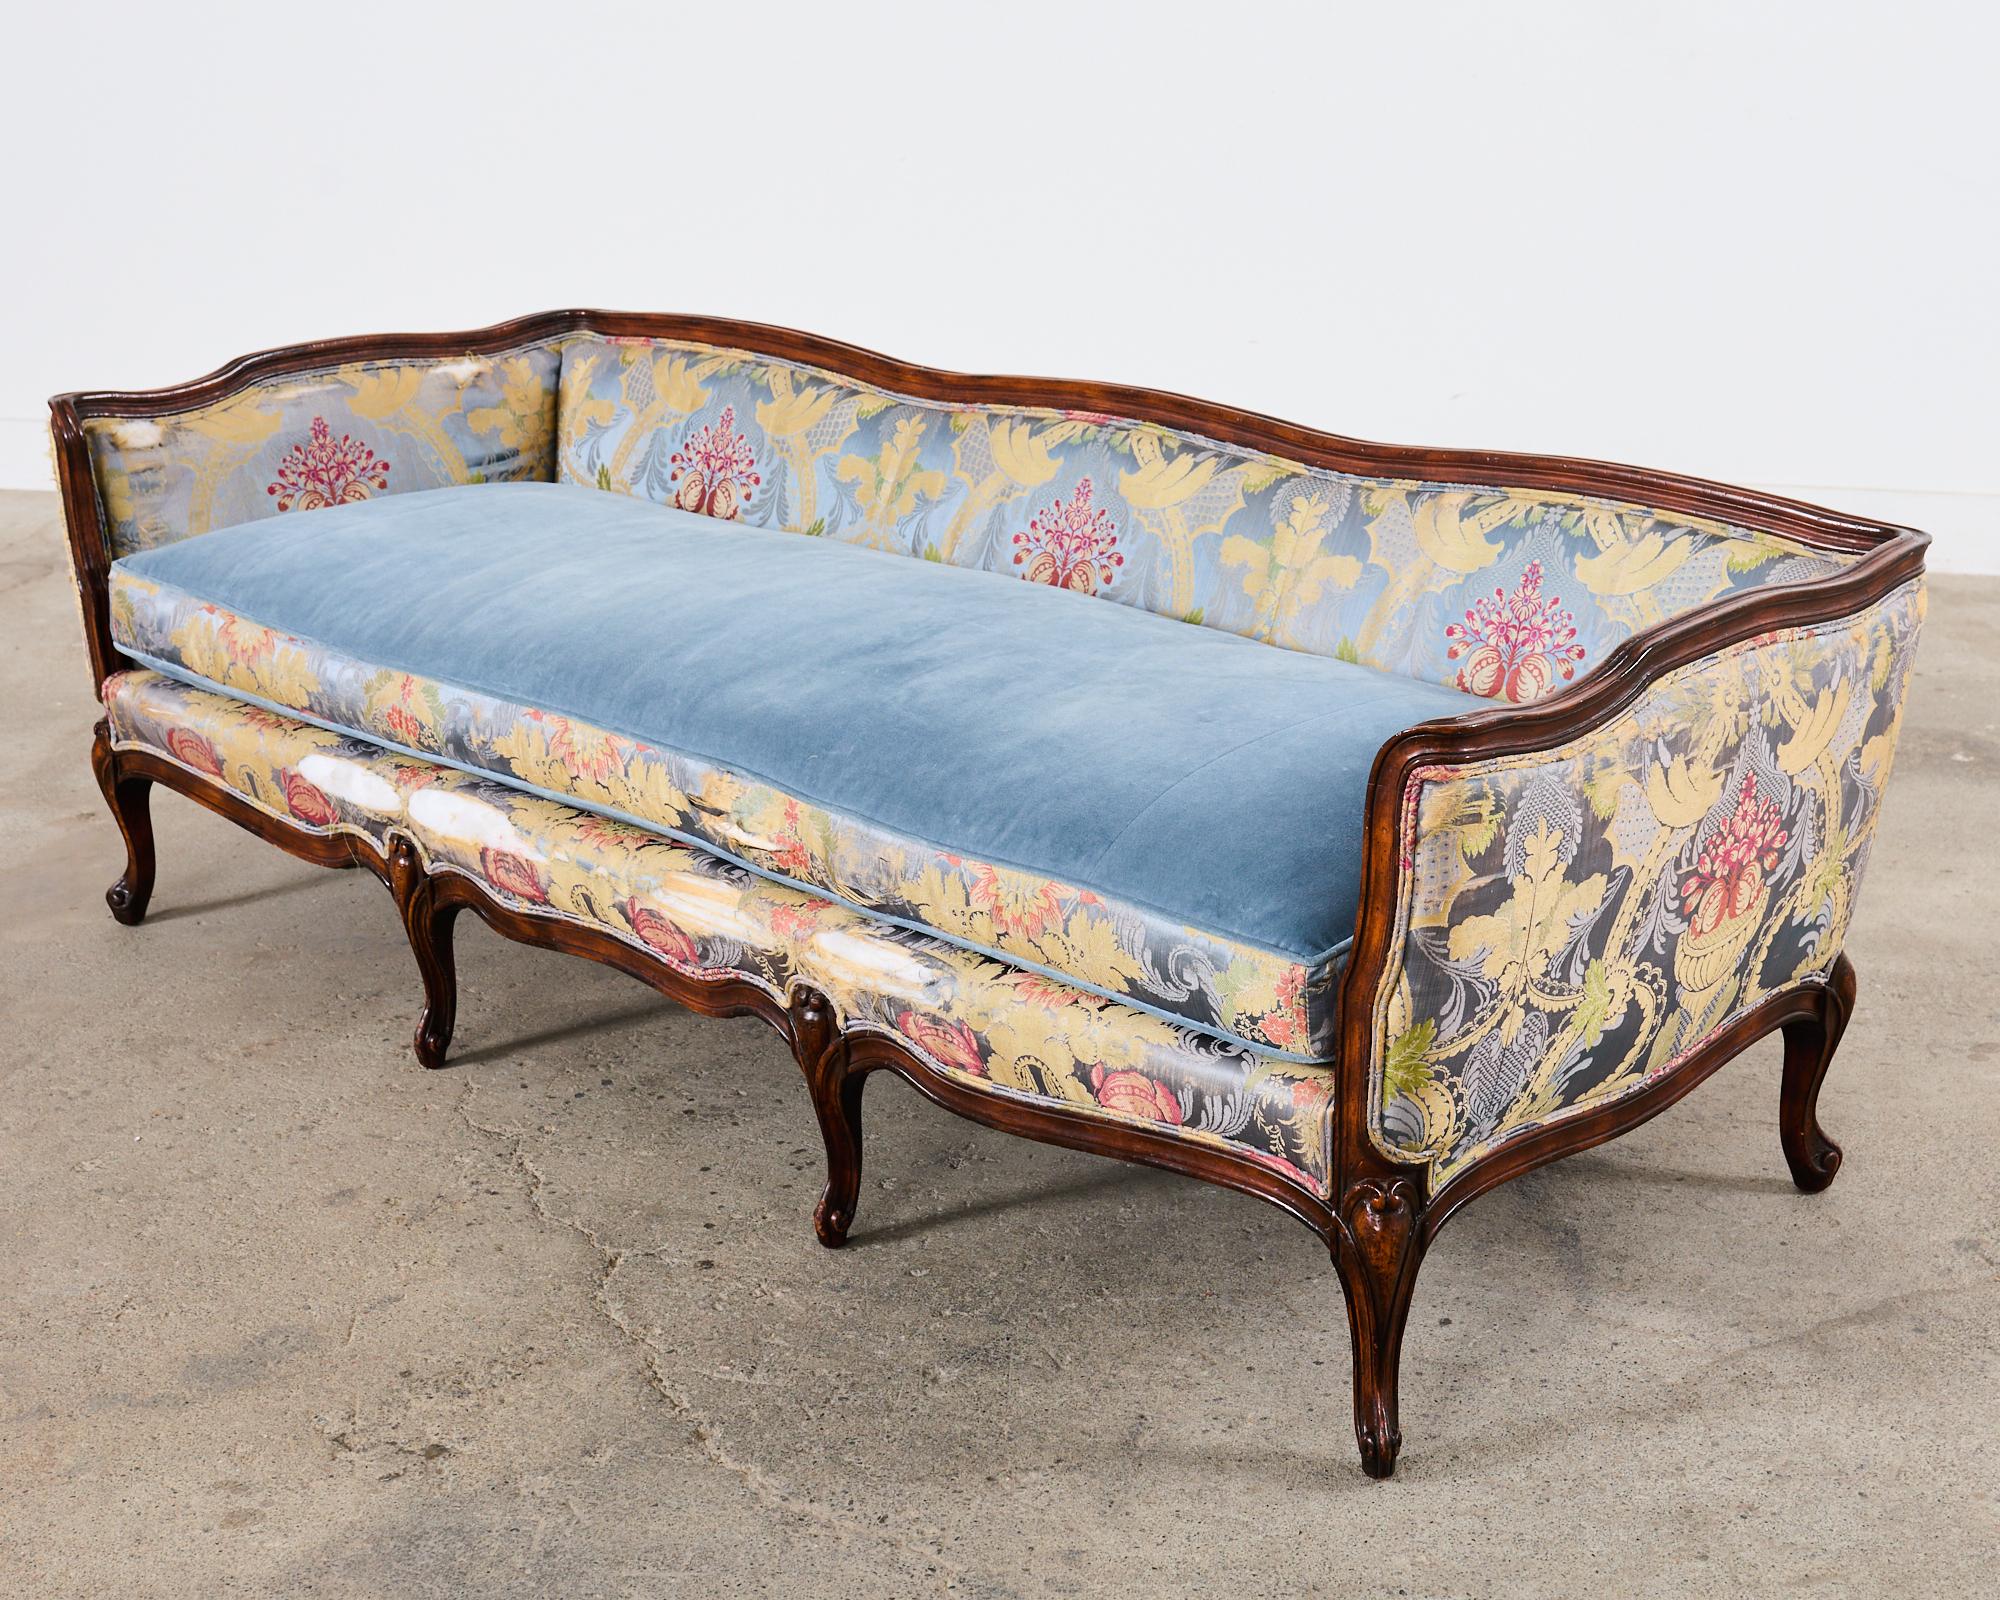 French Provincial Louis XV Style Serpentine Canape Sofa Settee For Sale 12